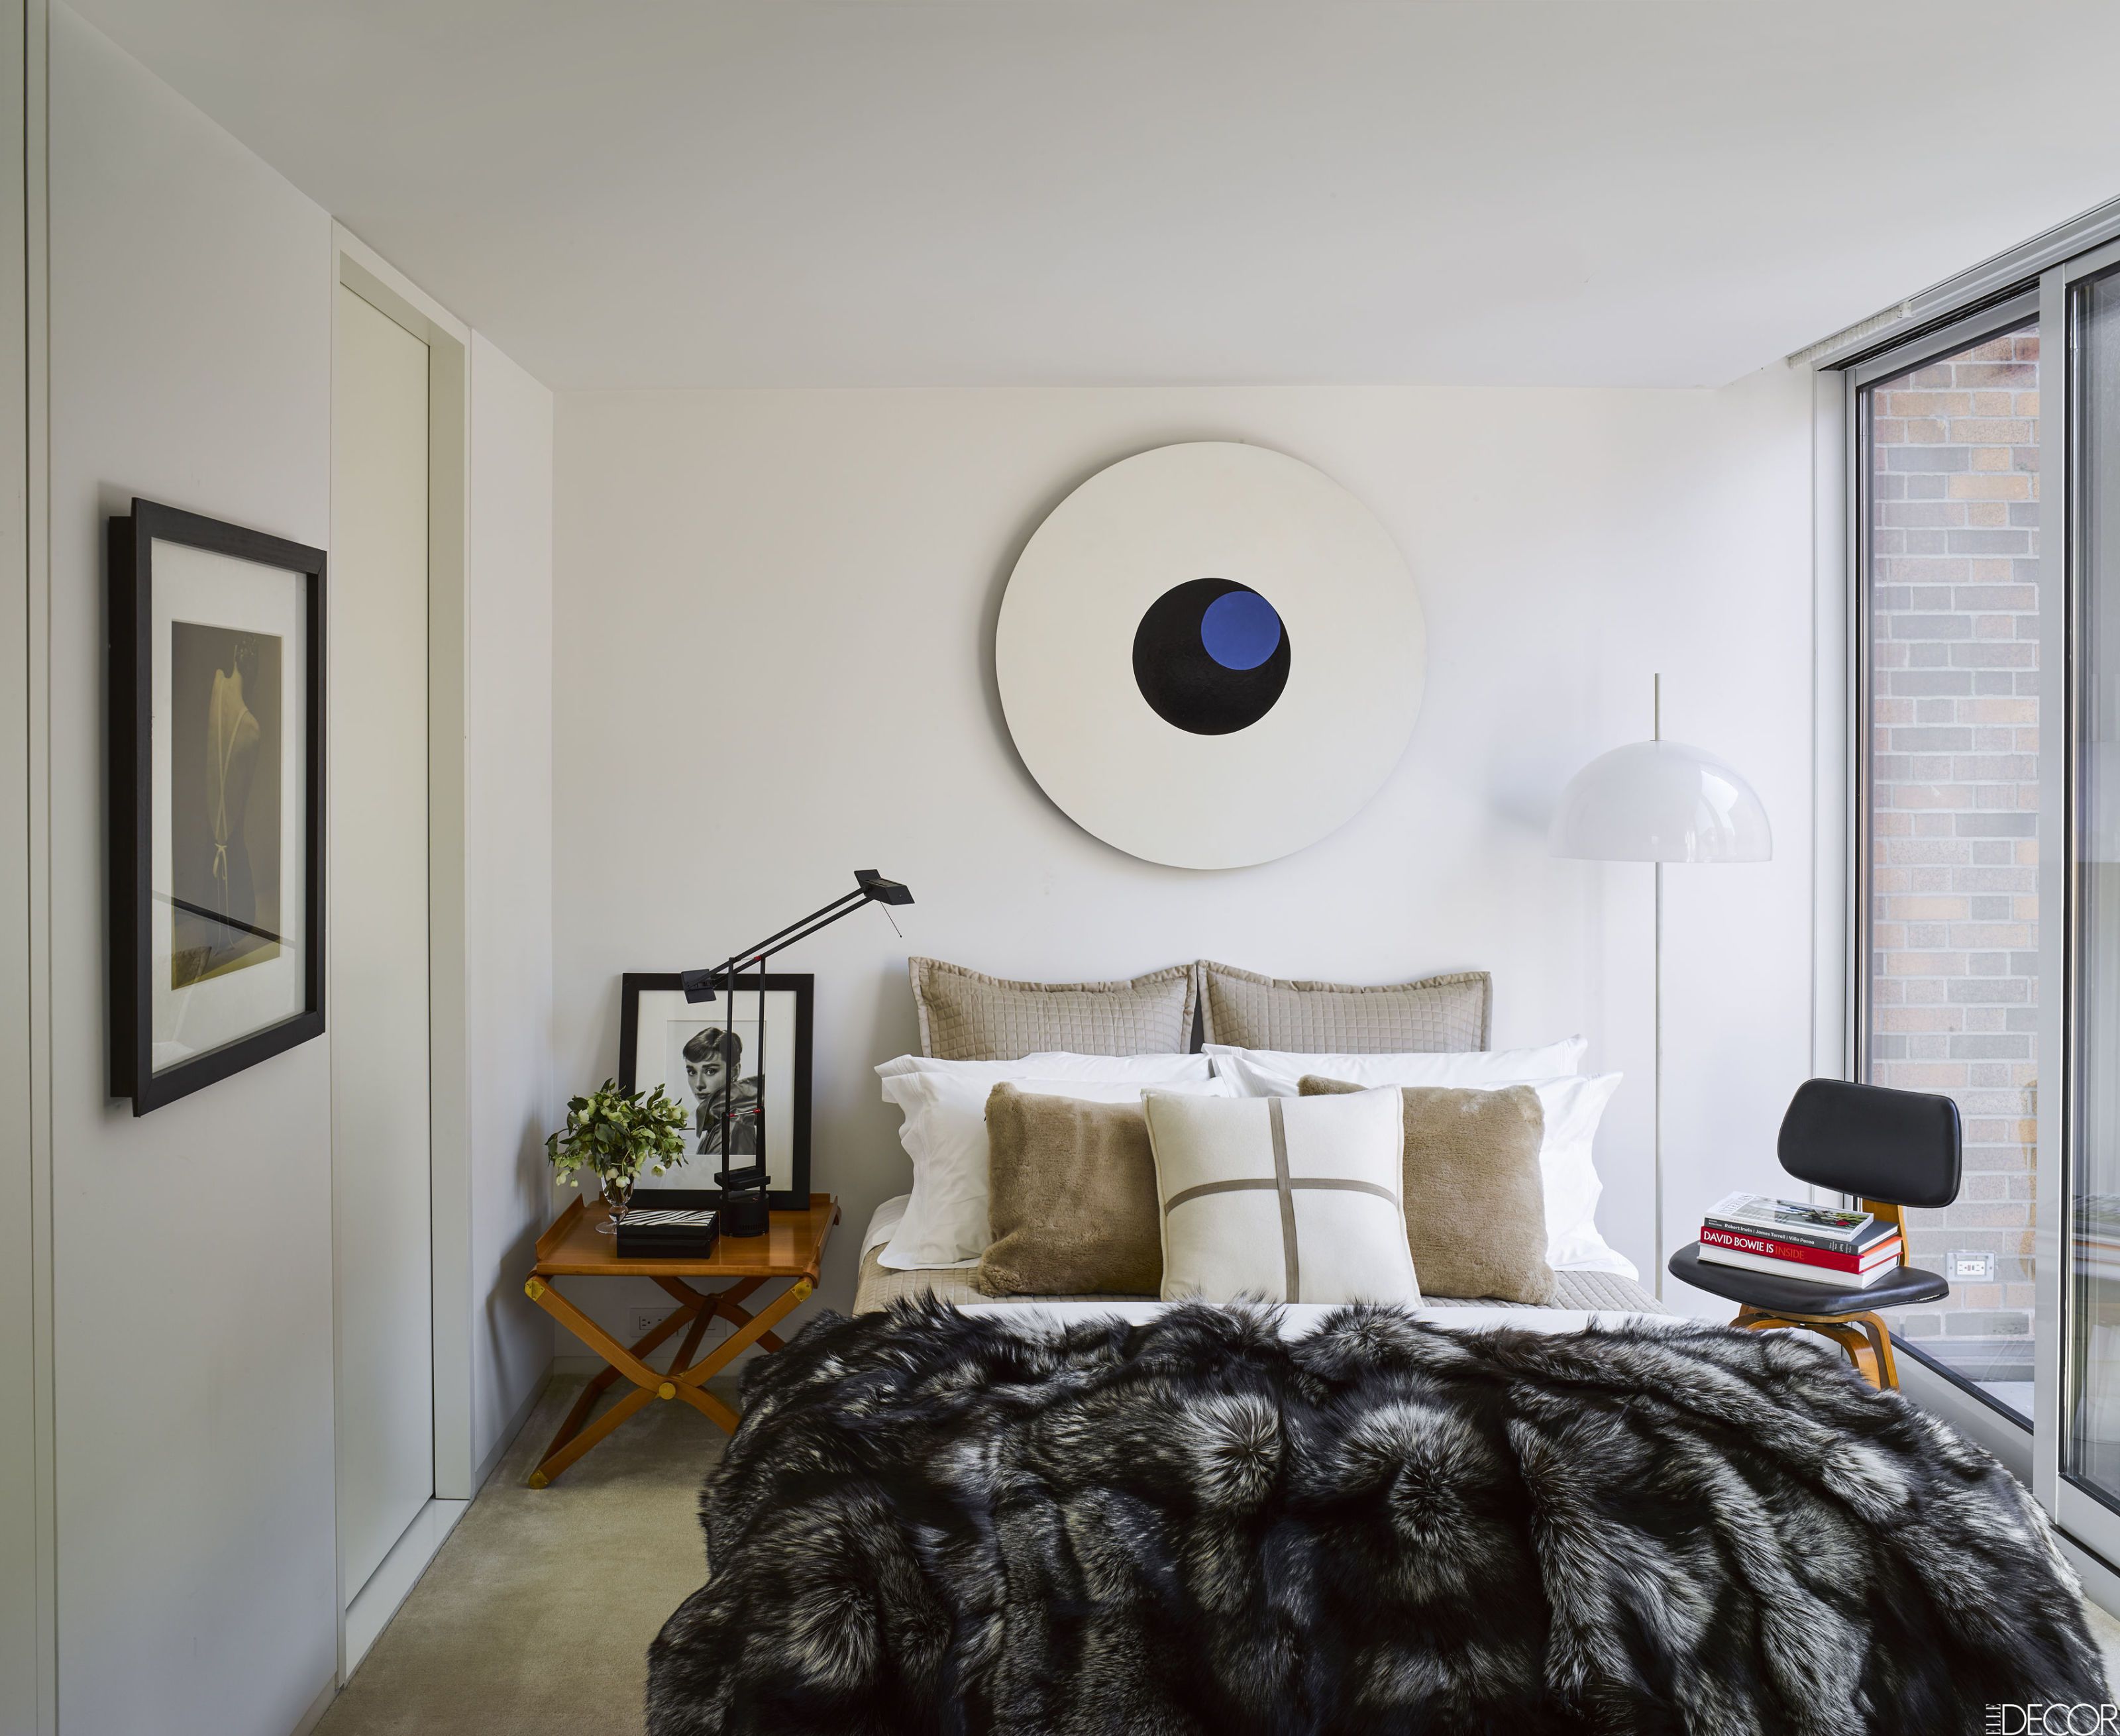 Must-Know Tips To Have The Better-Looking Small Bedroom Decor 5 Small Bedroom Decor